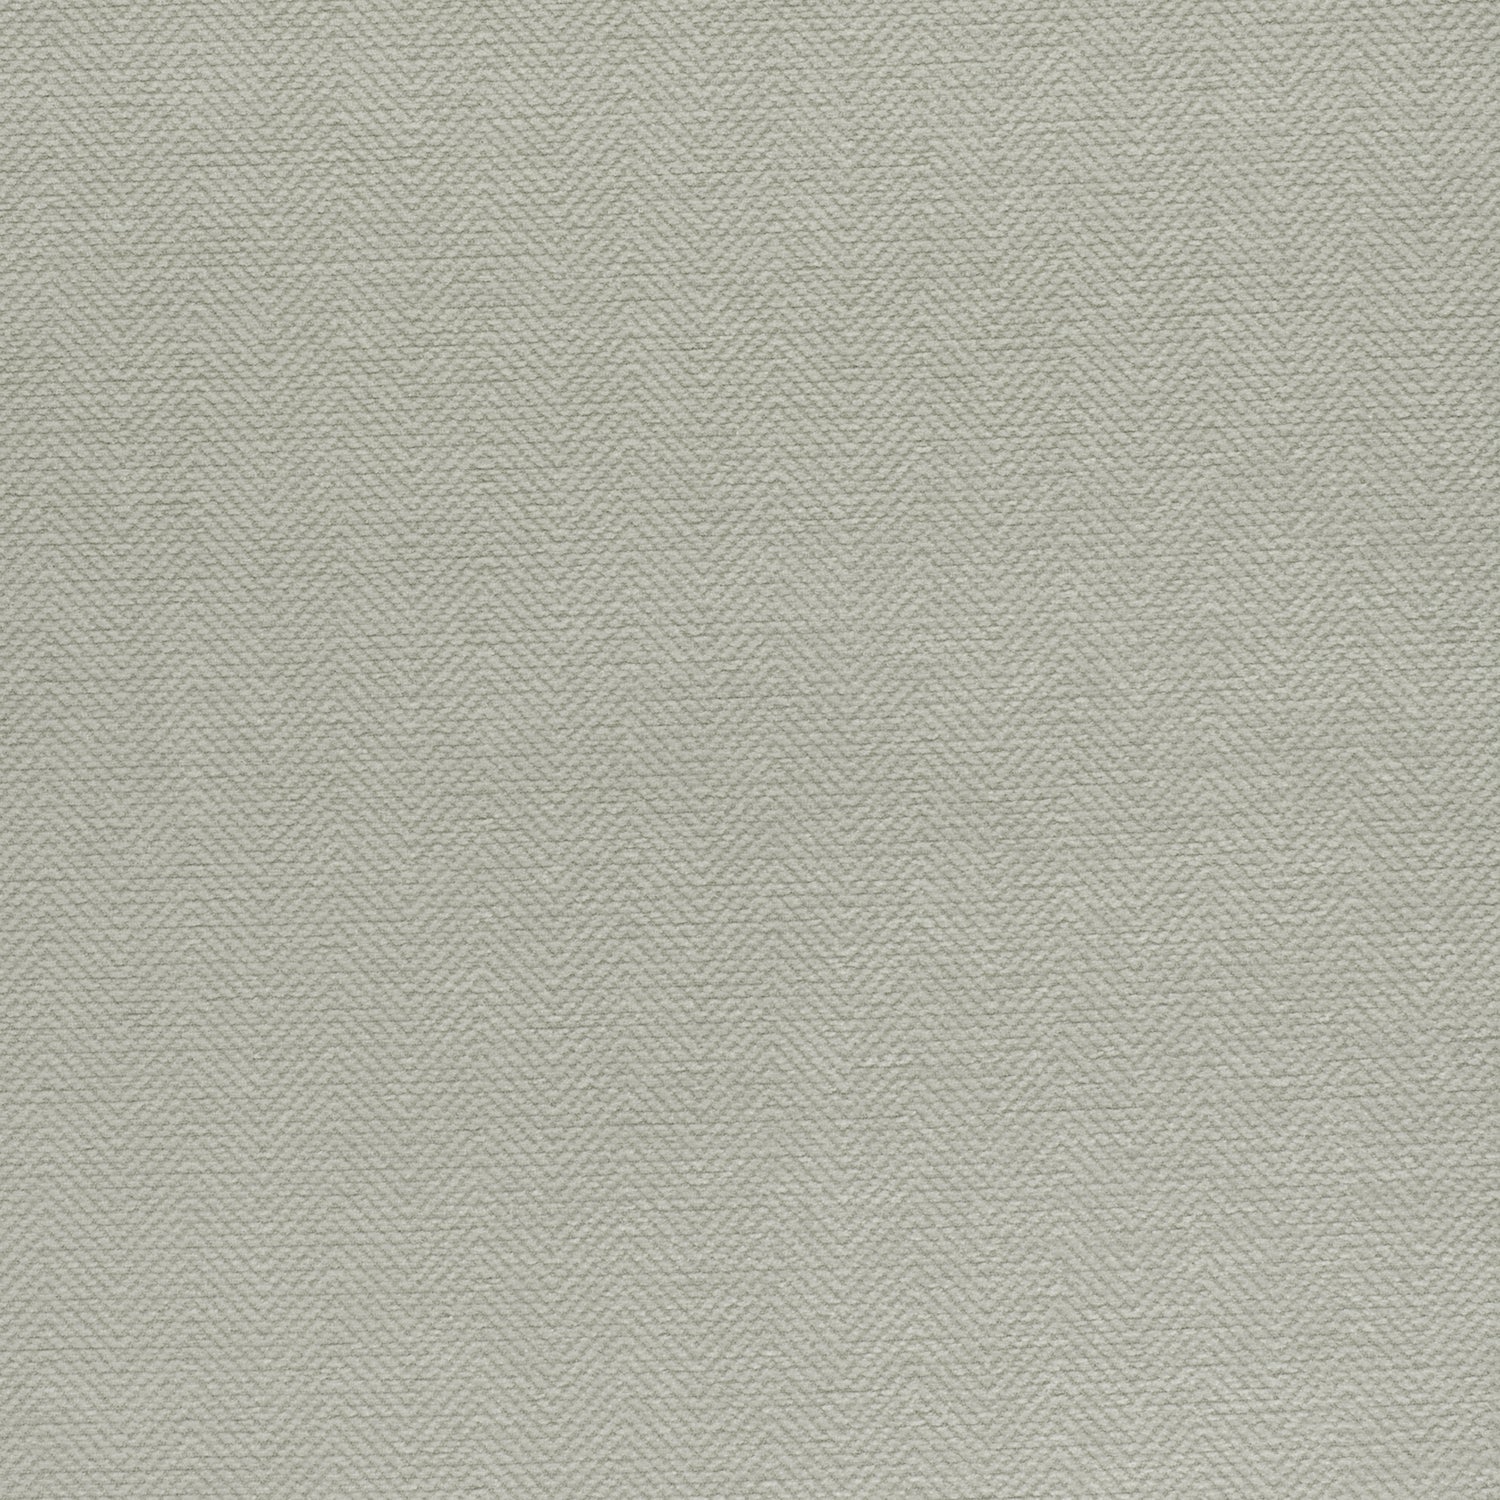 Bronwyn Herringbone fabric in stone color - pattern number W80684 - by Thibaut in the Pinnacle collection